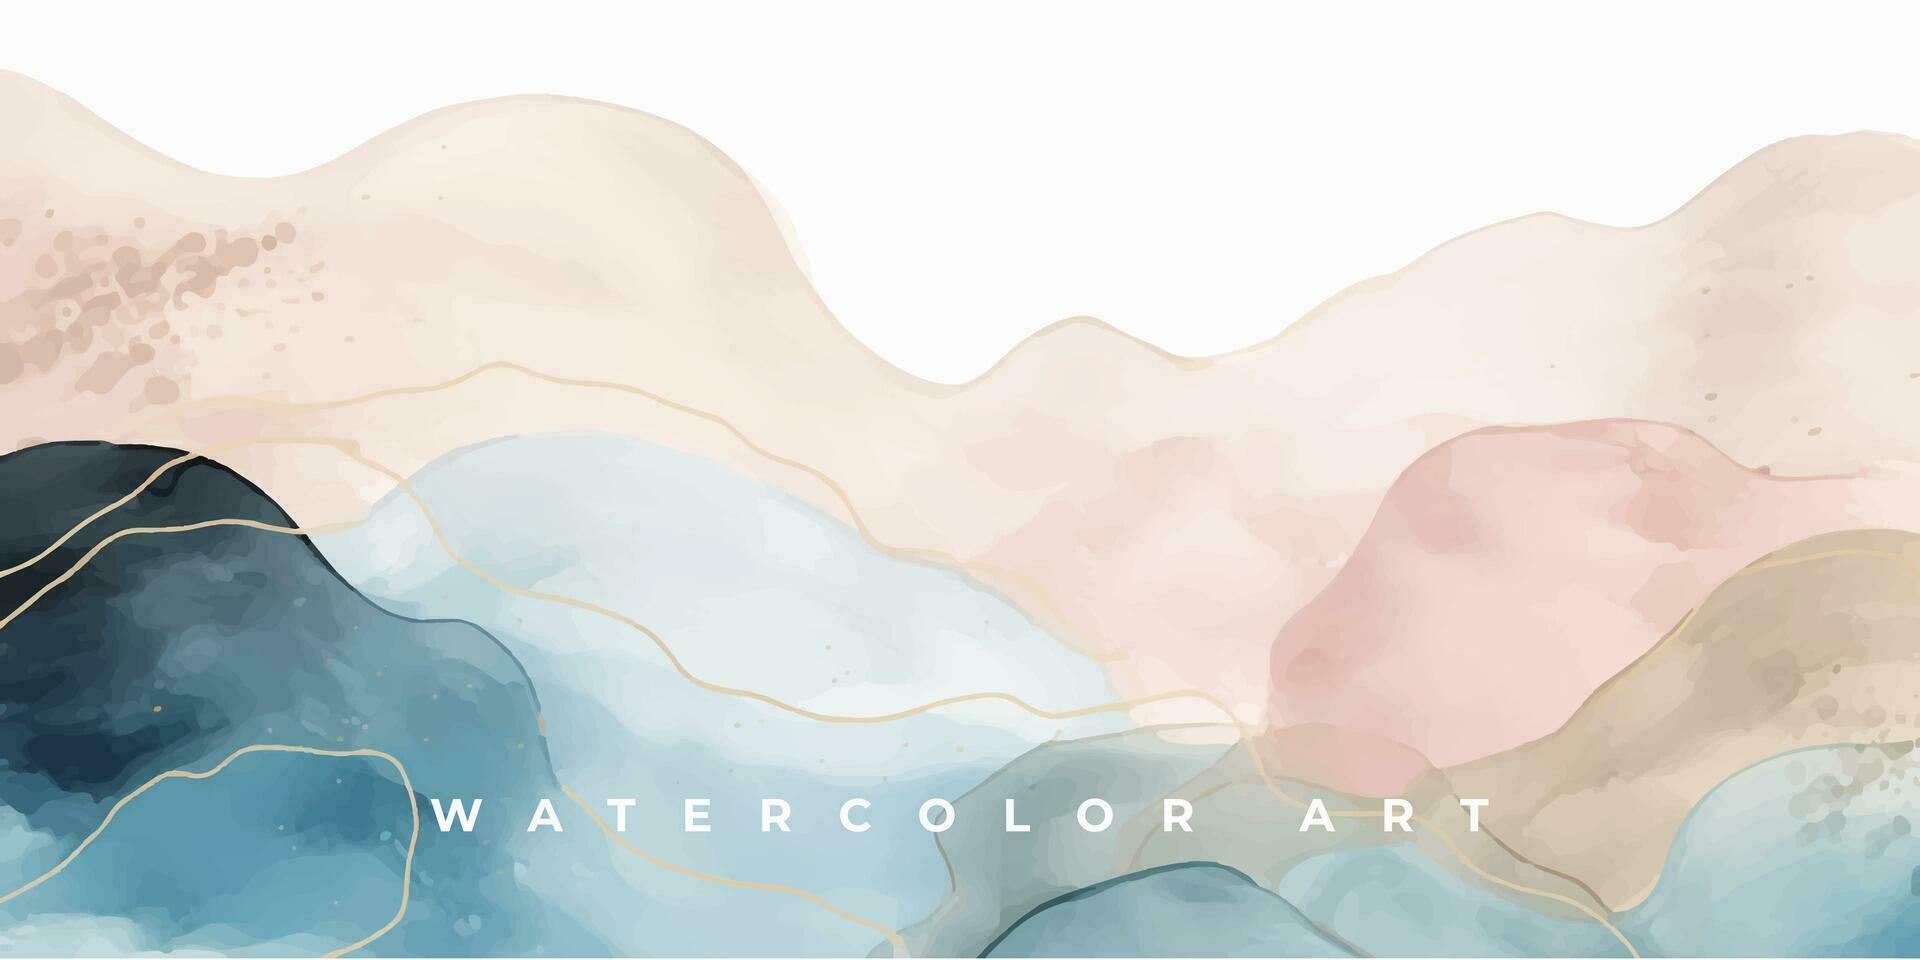 Watercolor art background vector. Wallpaper design with paint brush and gold line art. Earth tone blue, pink, ivory, beige watercolor Illustration for prints, wall art, cover and invitation cards. vector